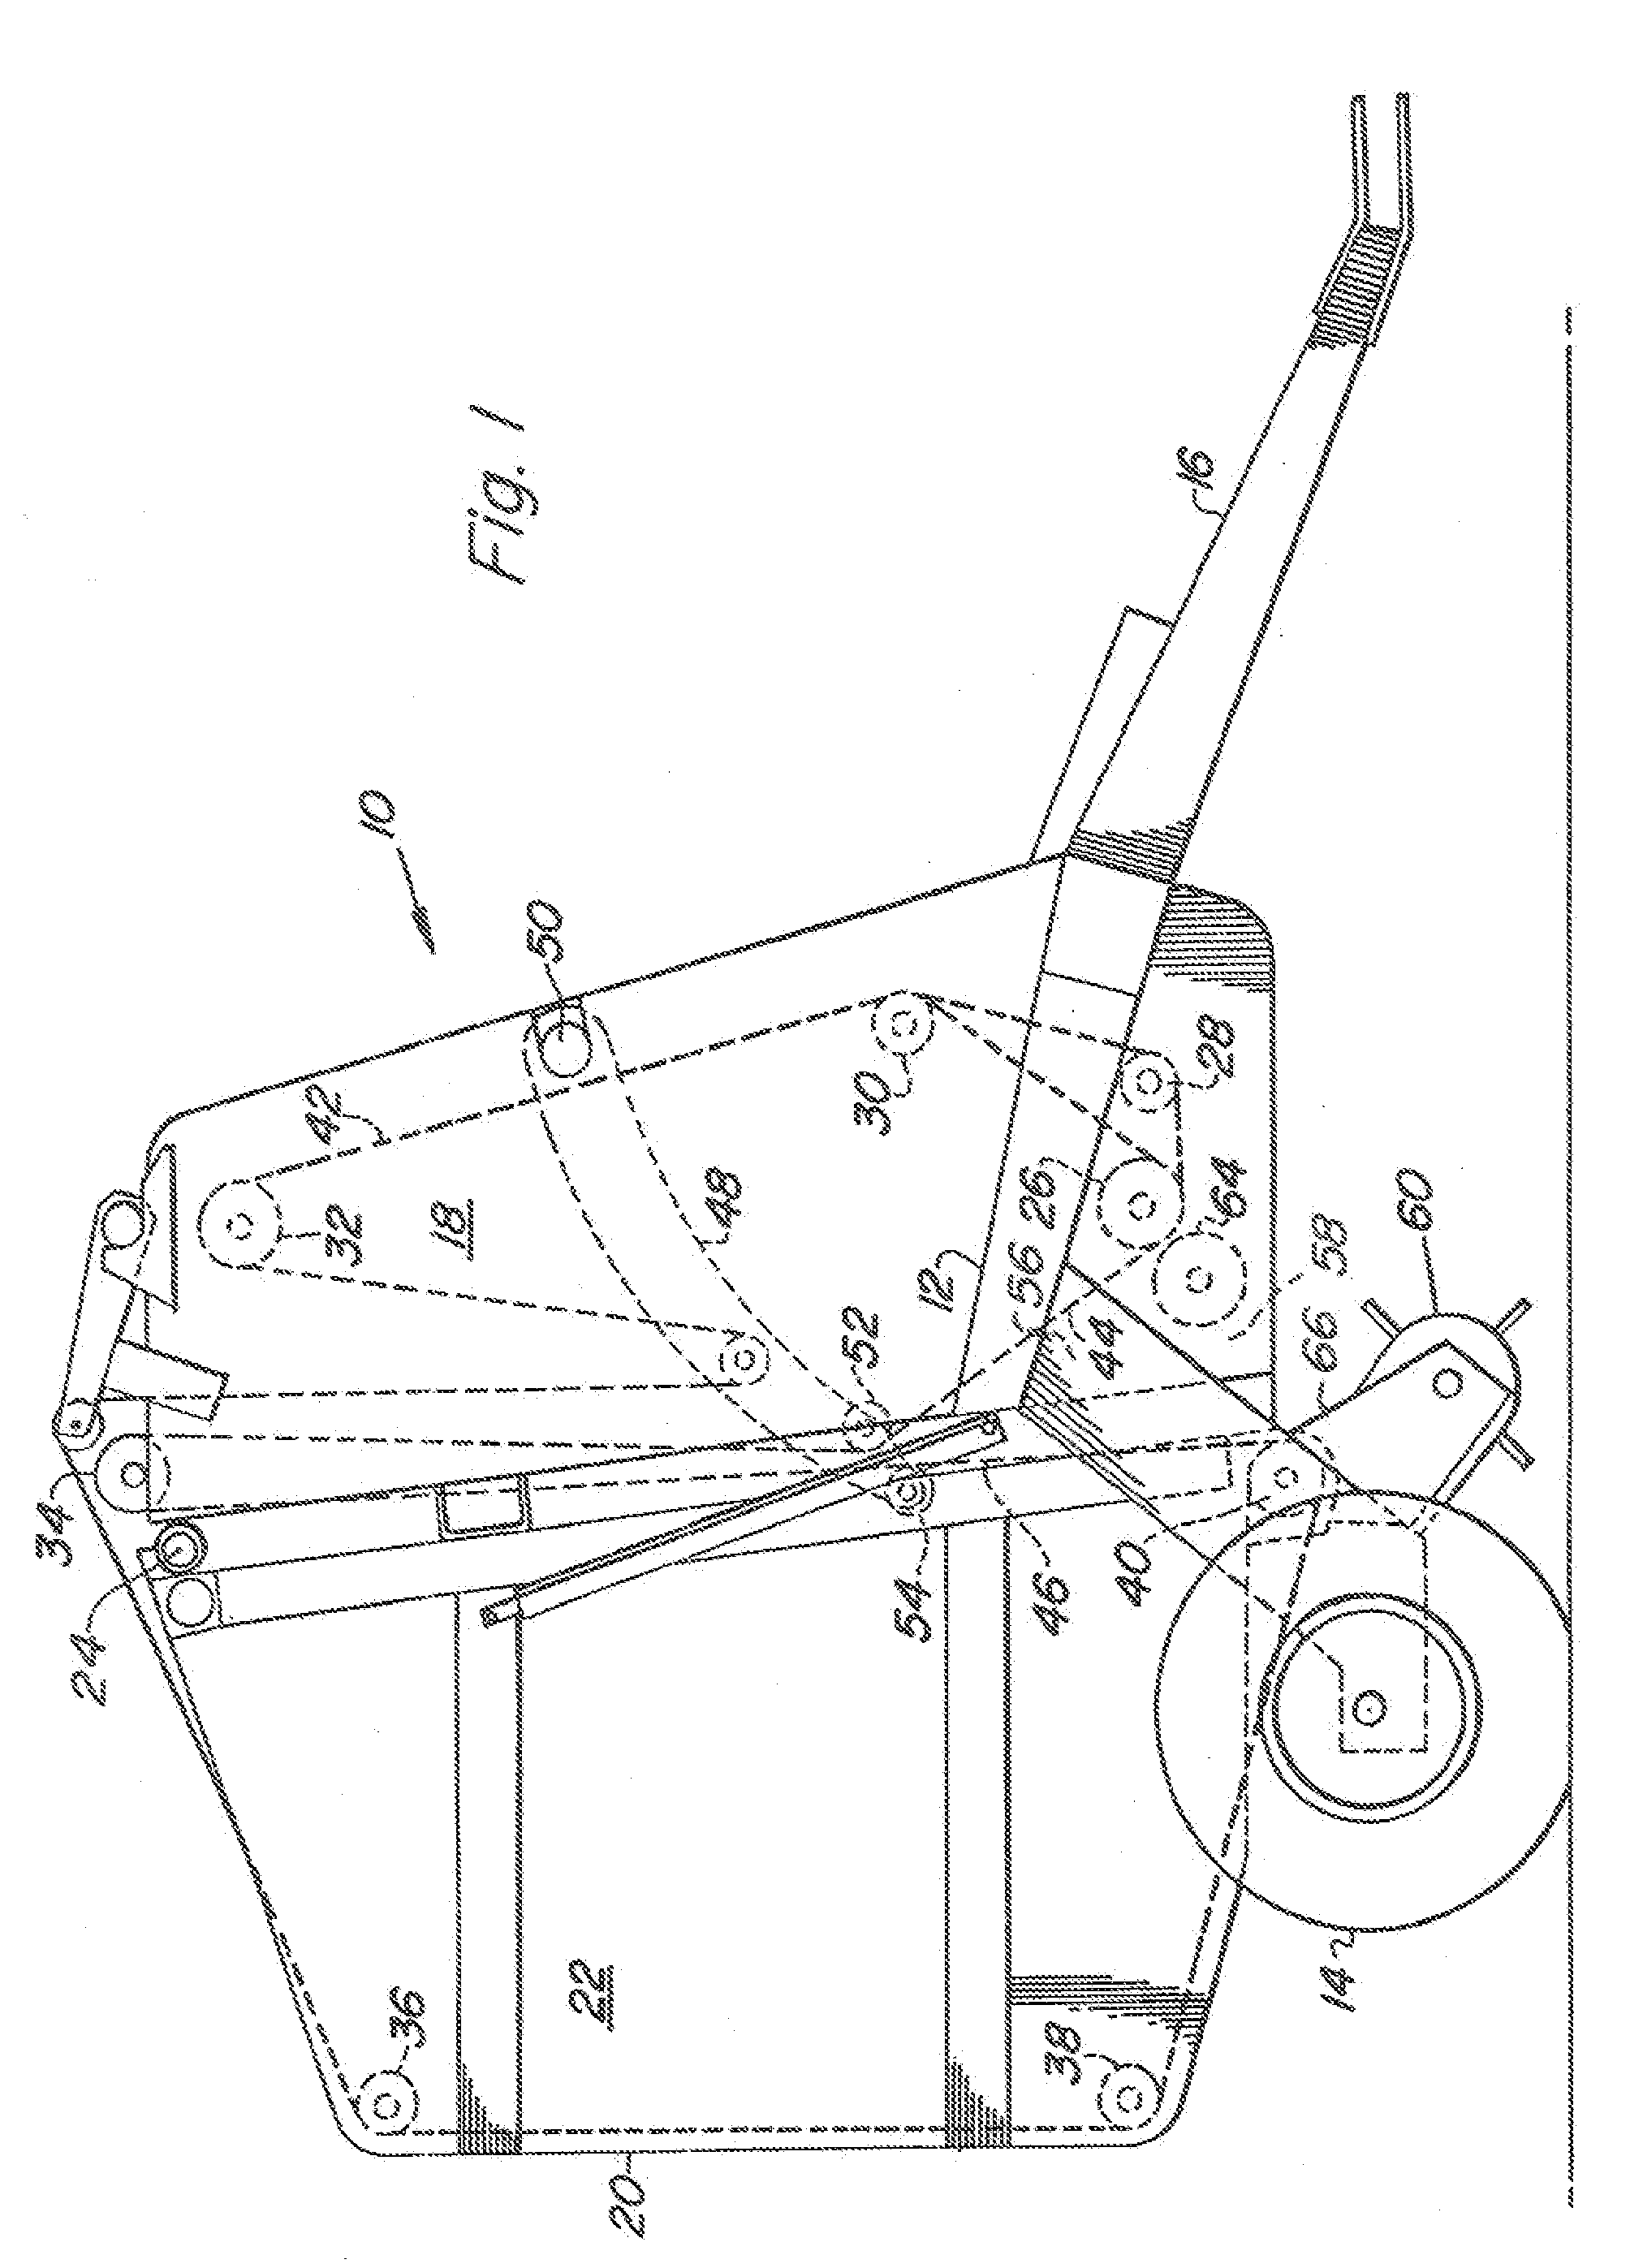 Non-Circular Wire Crop Pick-Up Tooth